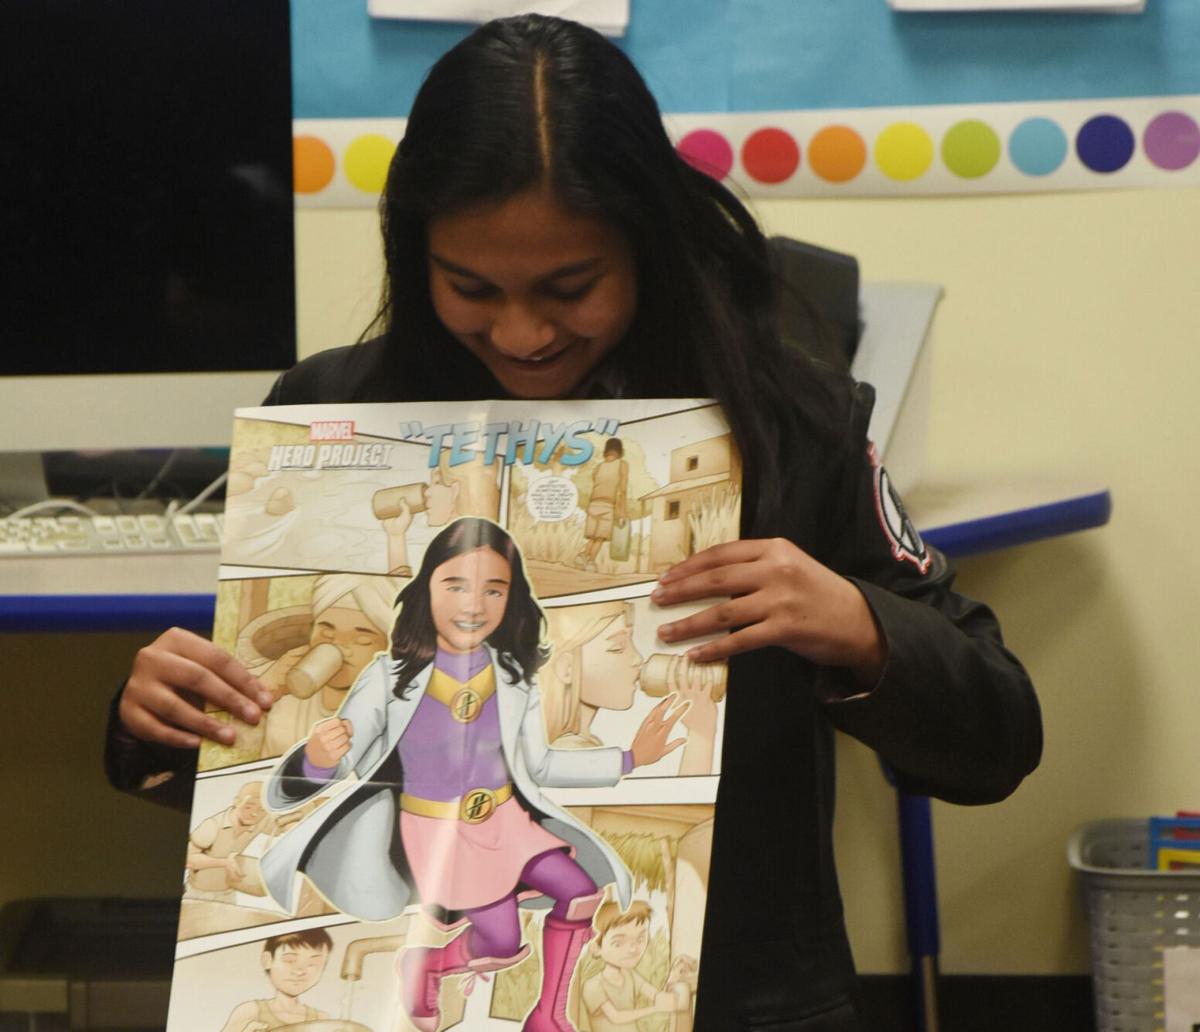 Colorado student named Time magazine's 'Kid of the Year'